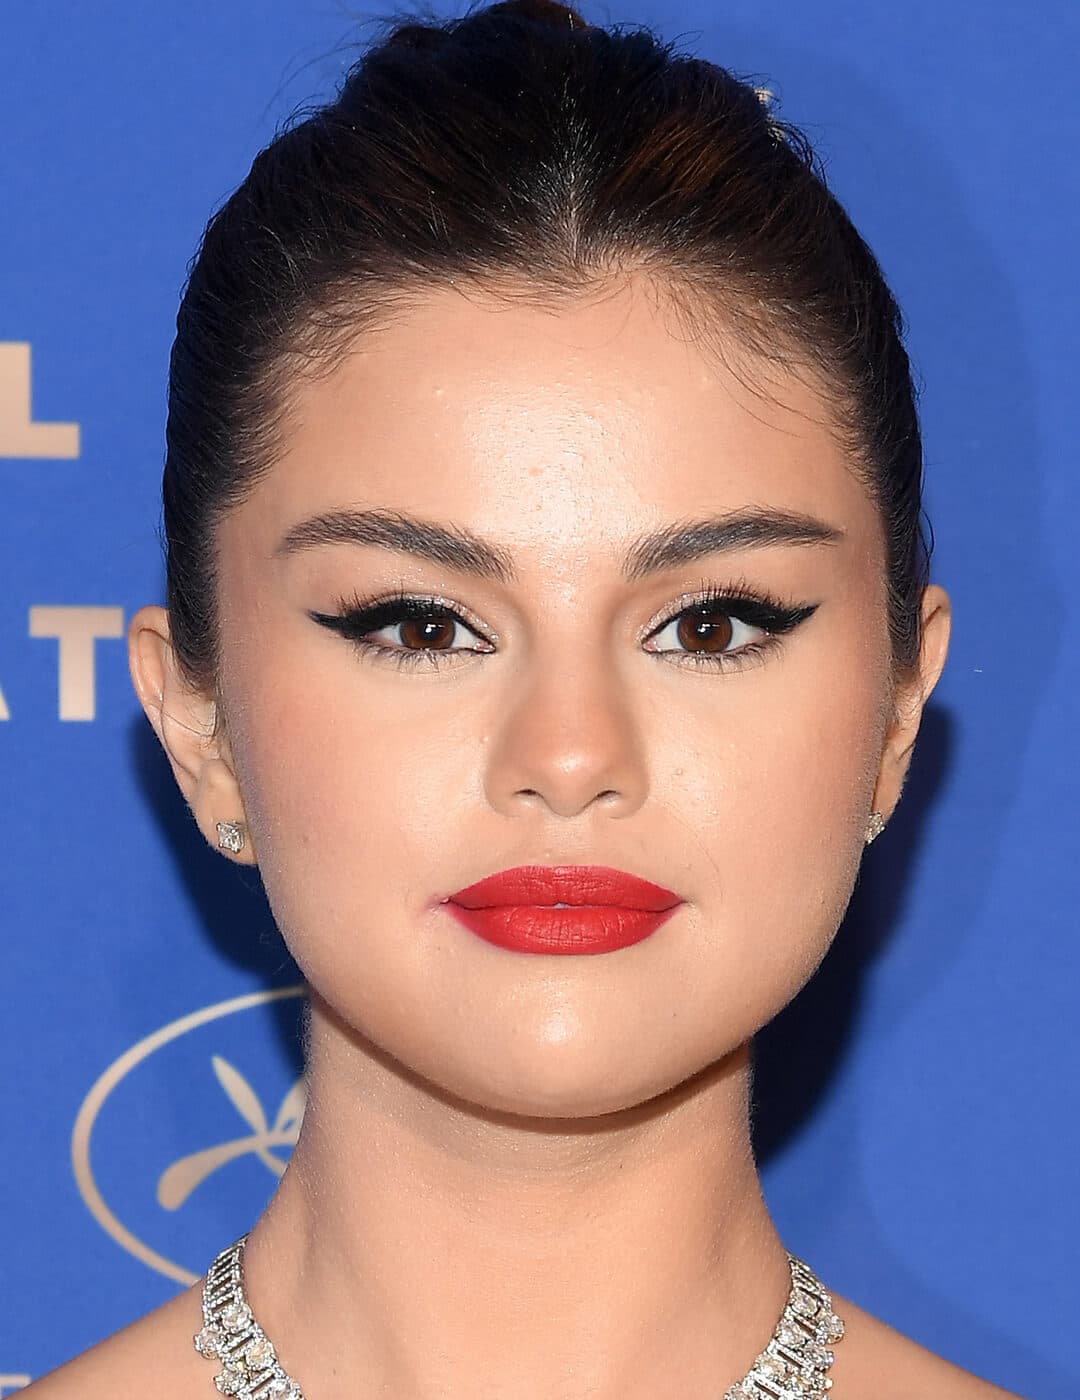 Selena Gomez rocking a cat eyeliner makeup look paired with red lips